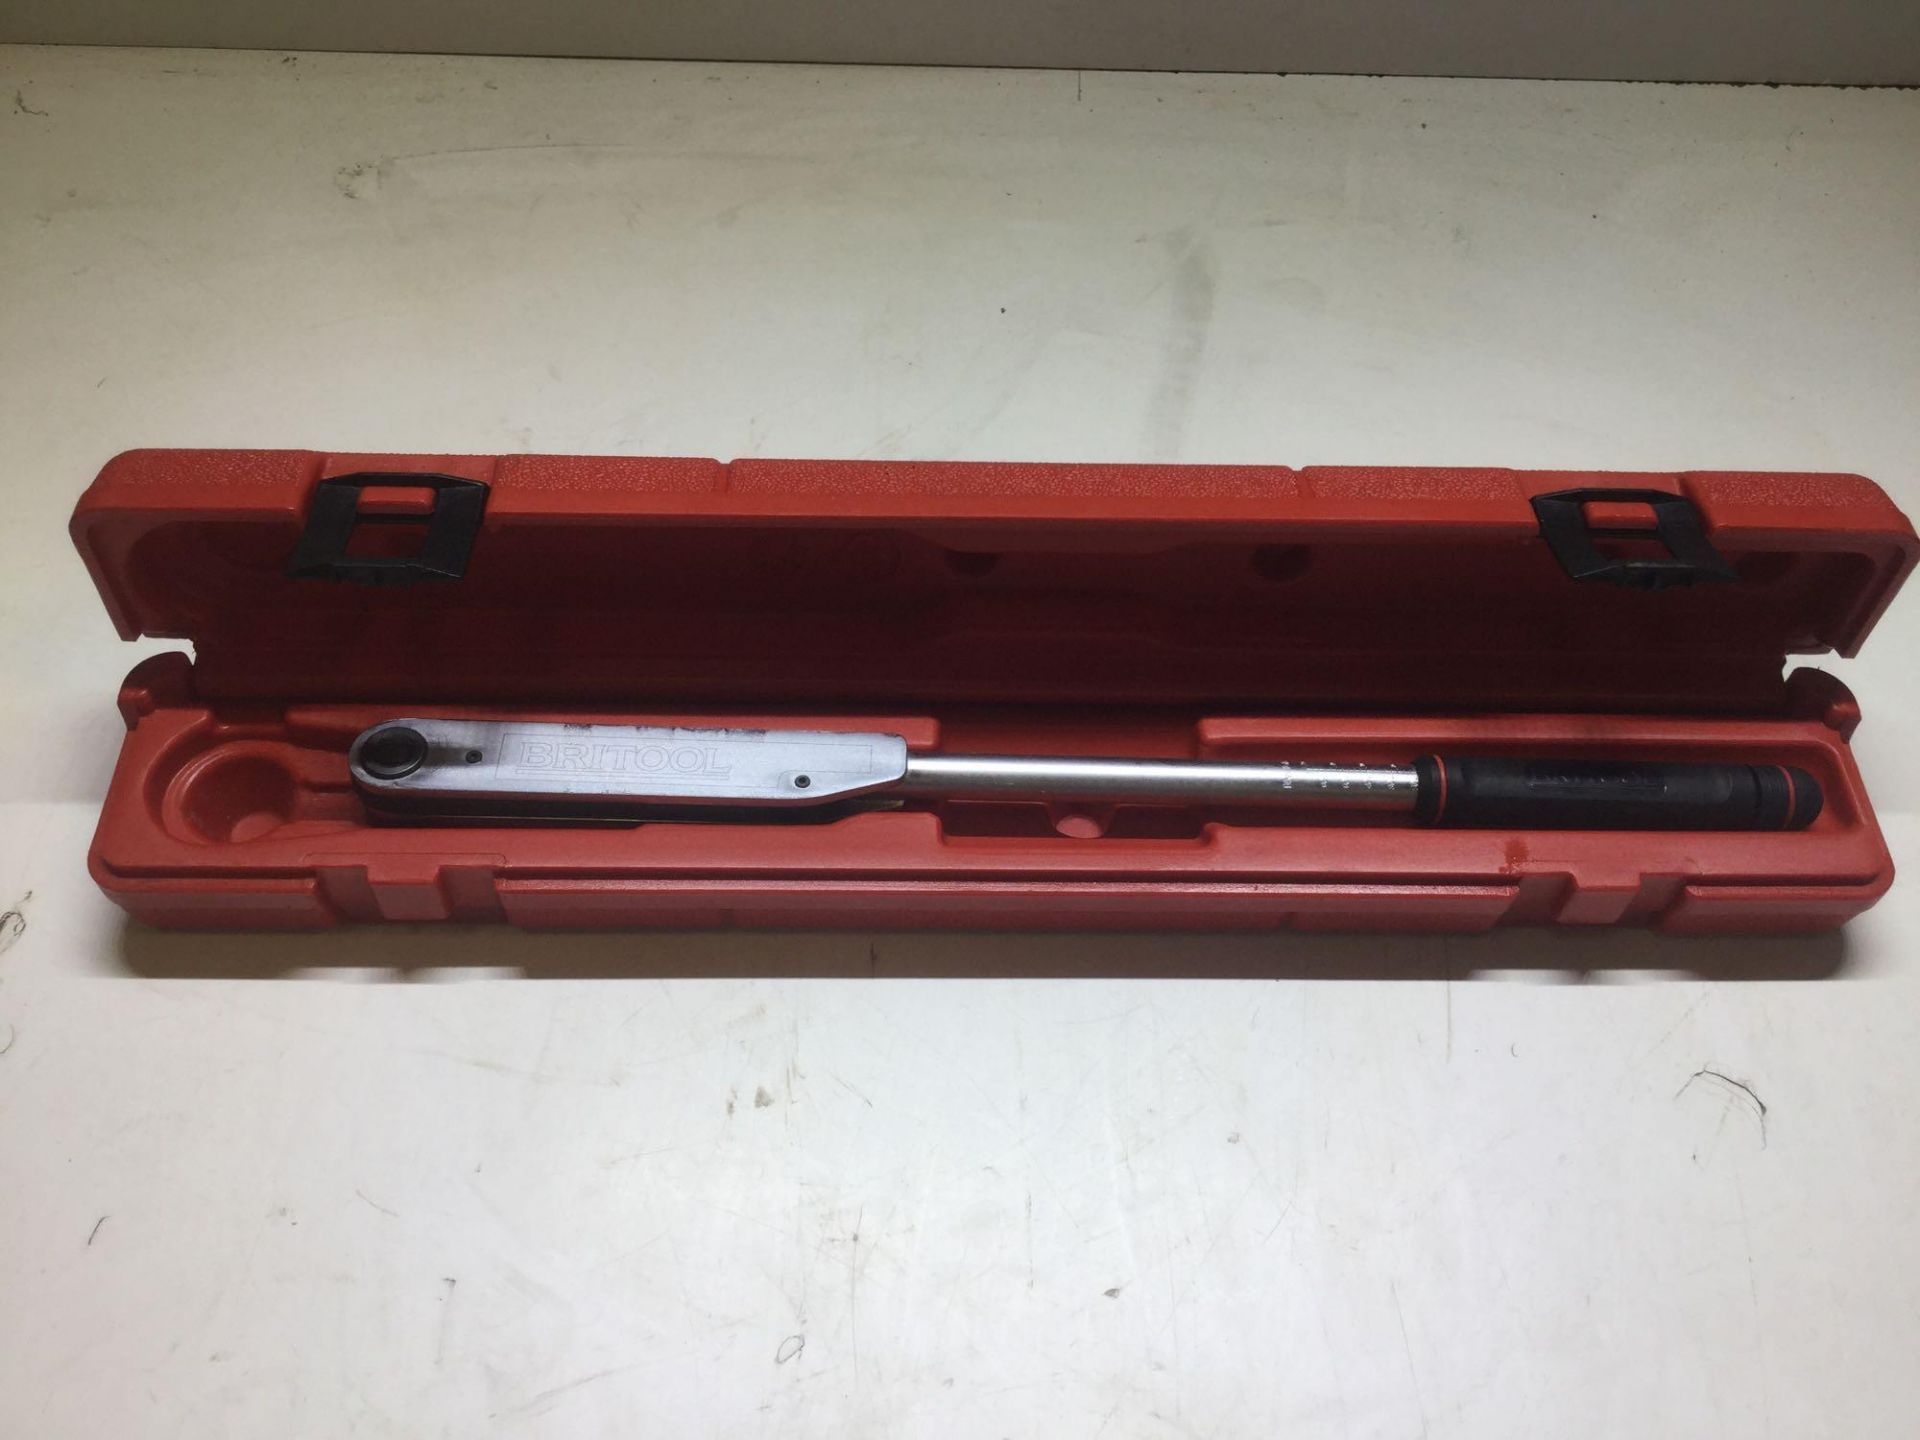 Britool 3/8 Torque Wrench (New In Box)